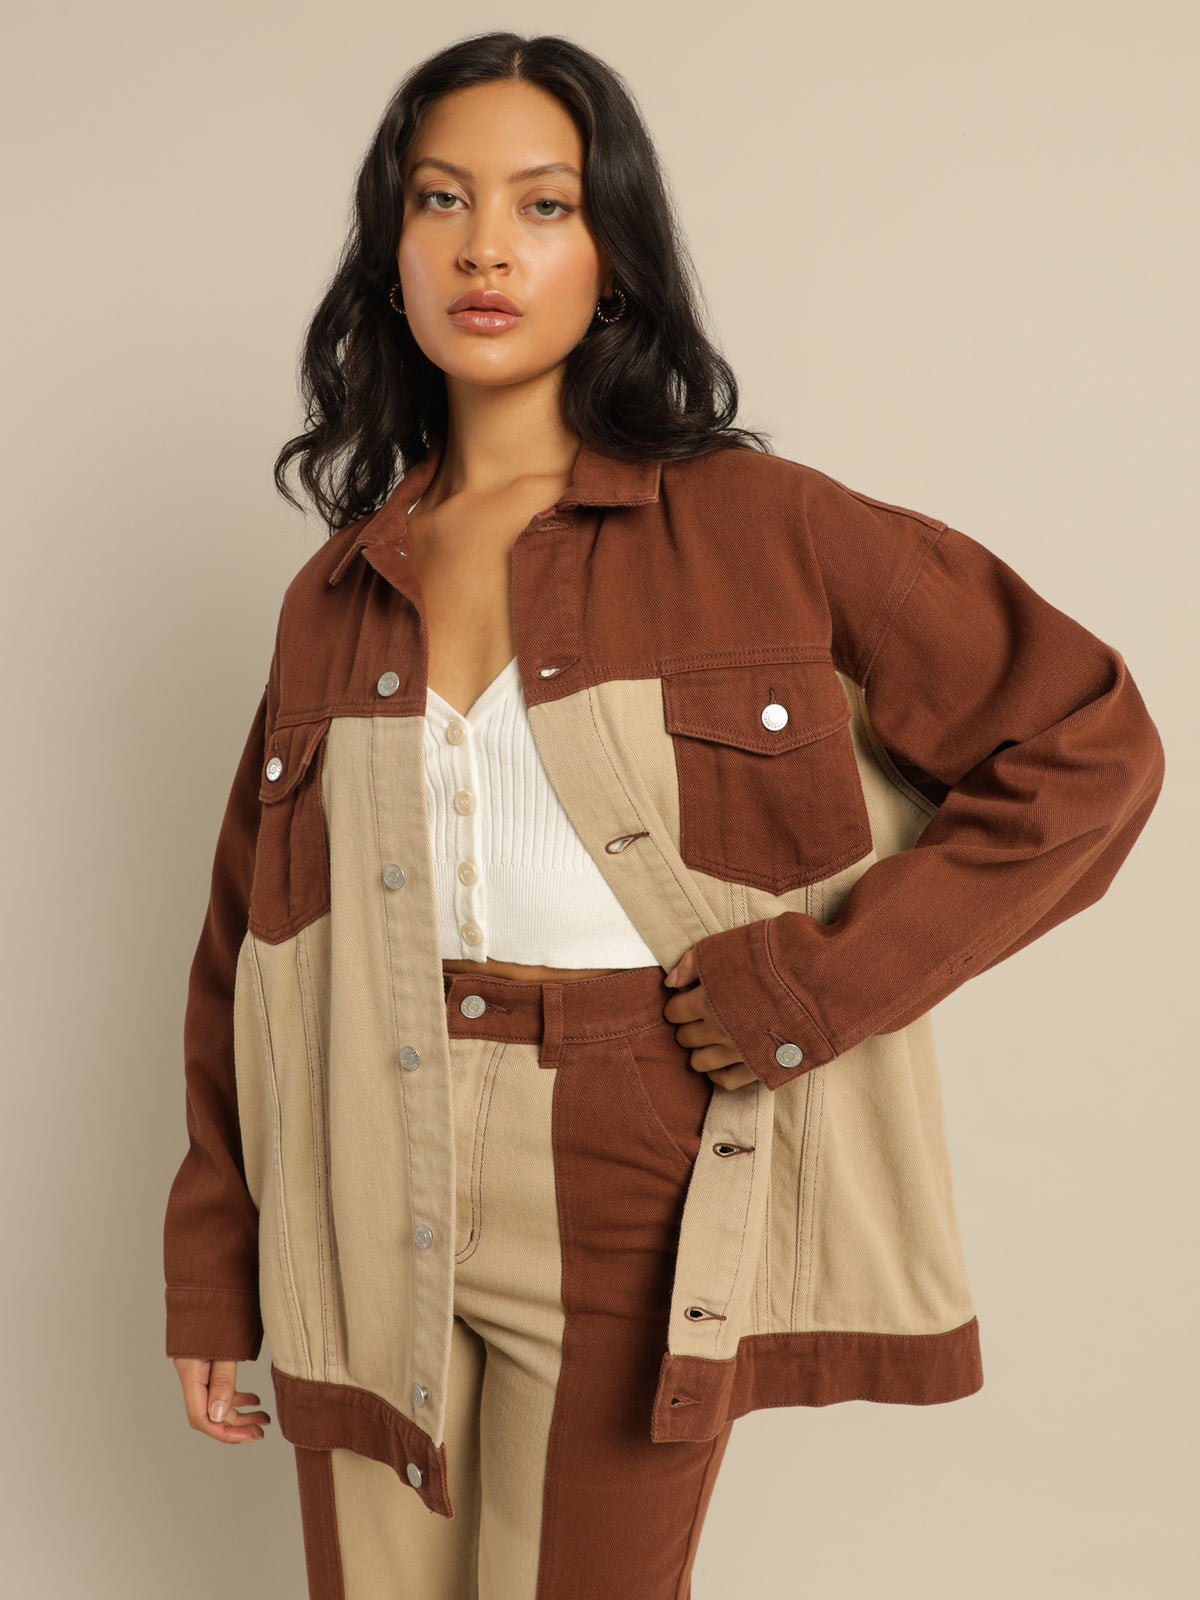 Lacey Patch Jacket in Patchwork